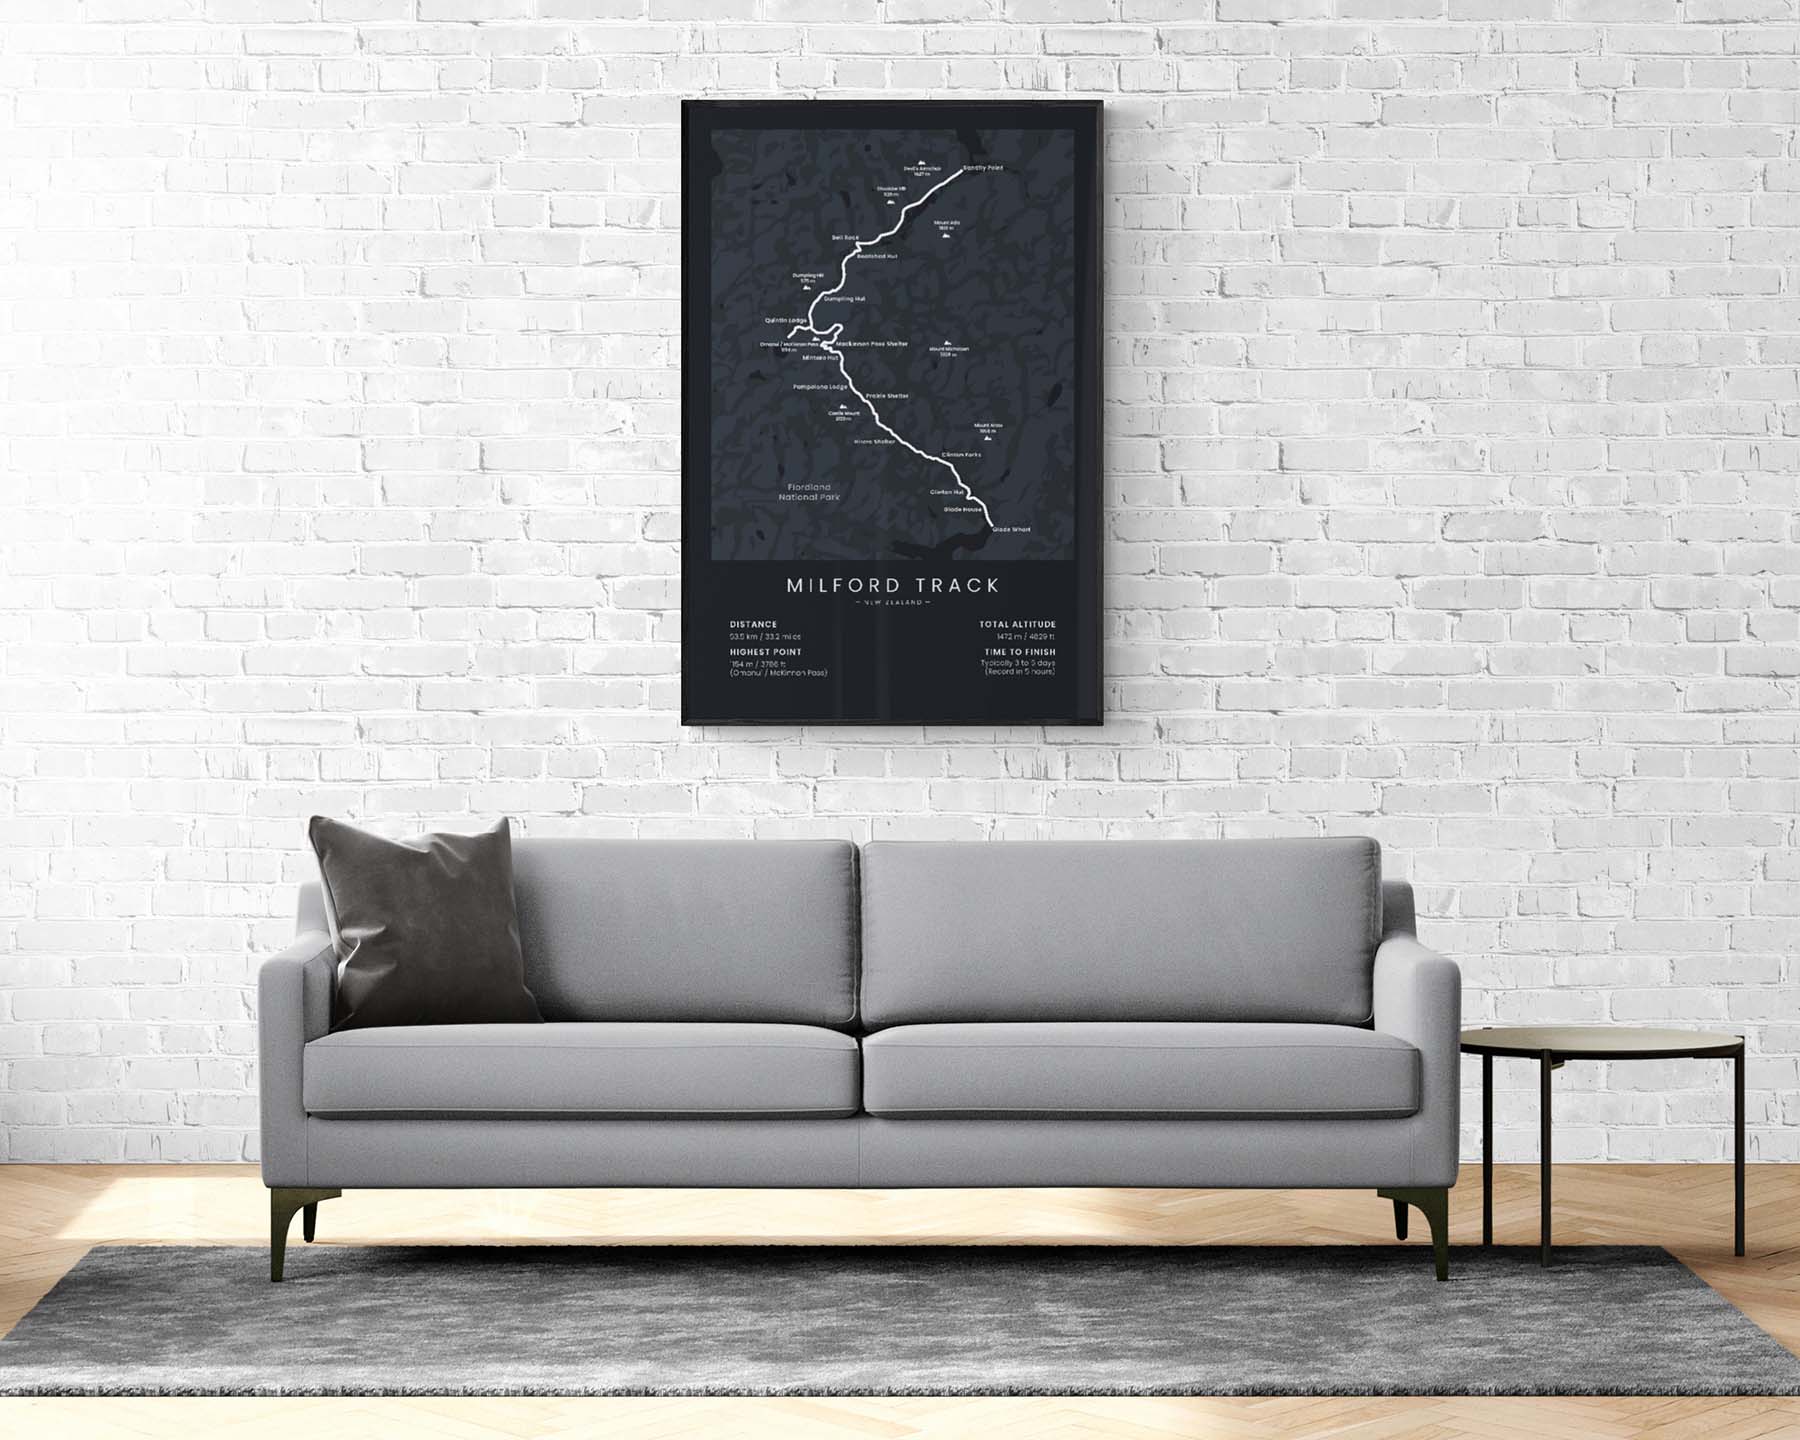 The Finest Walk in the World (South Island) hiking trail map art in minimal room decor